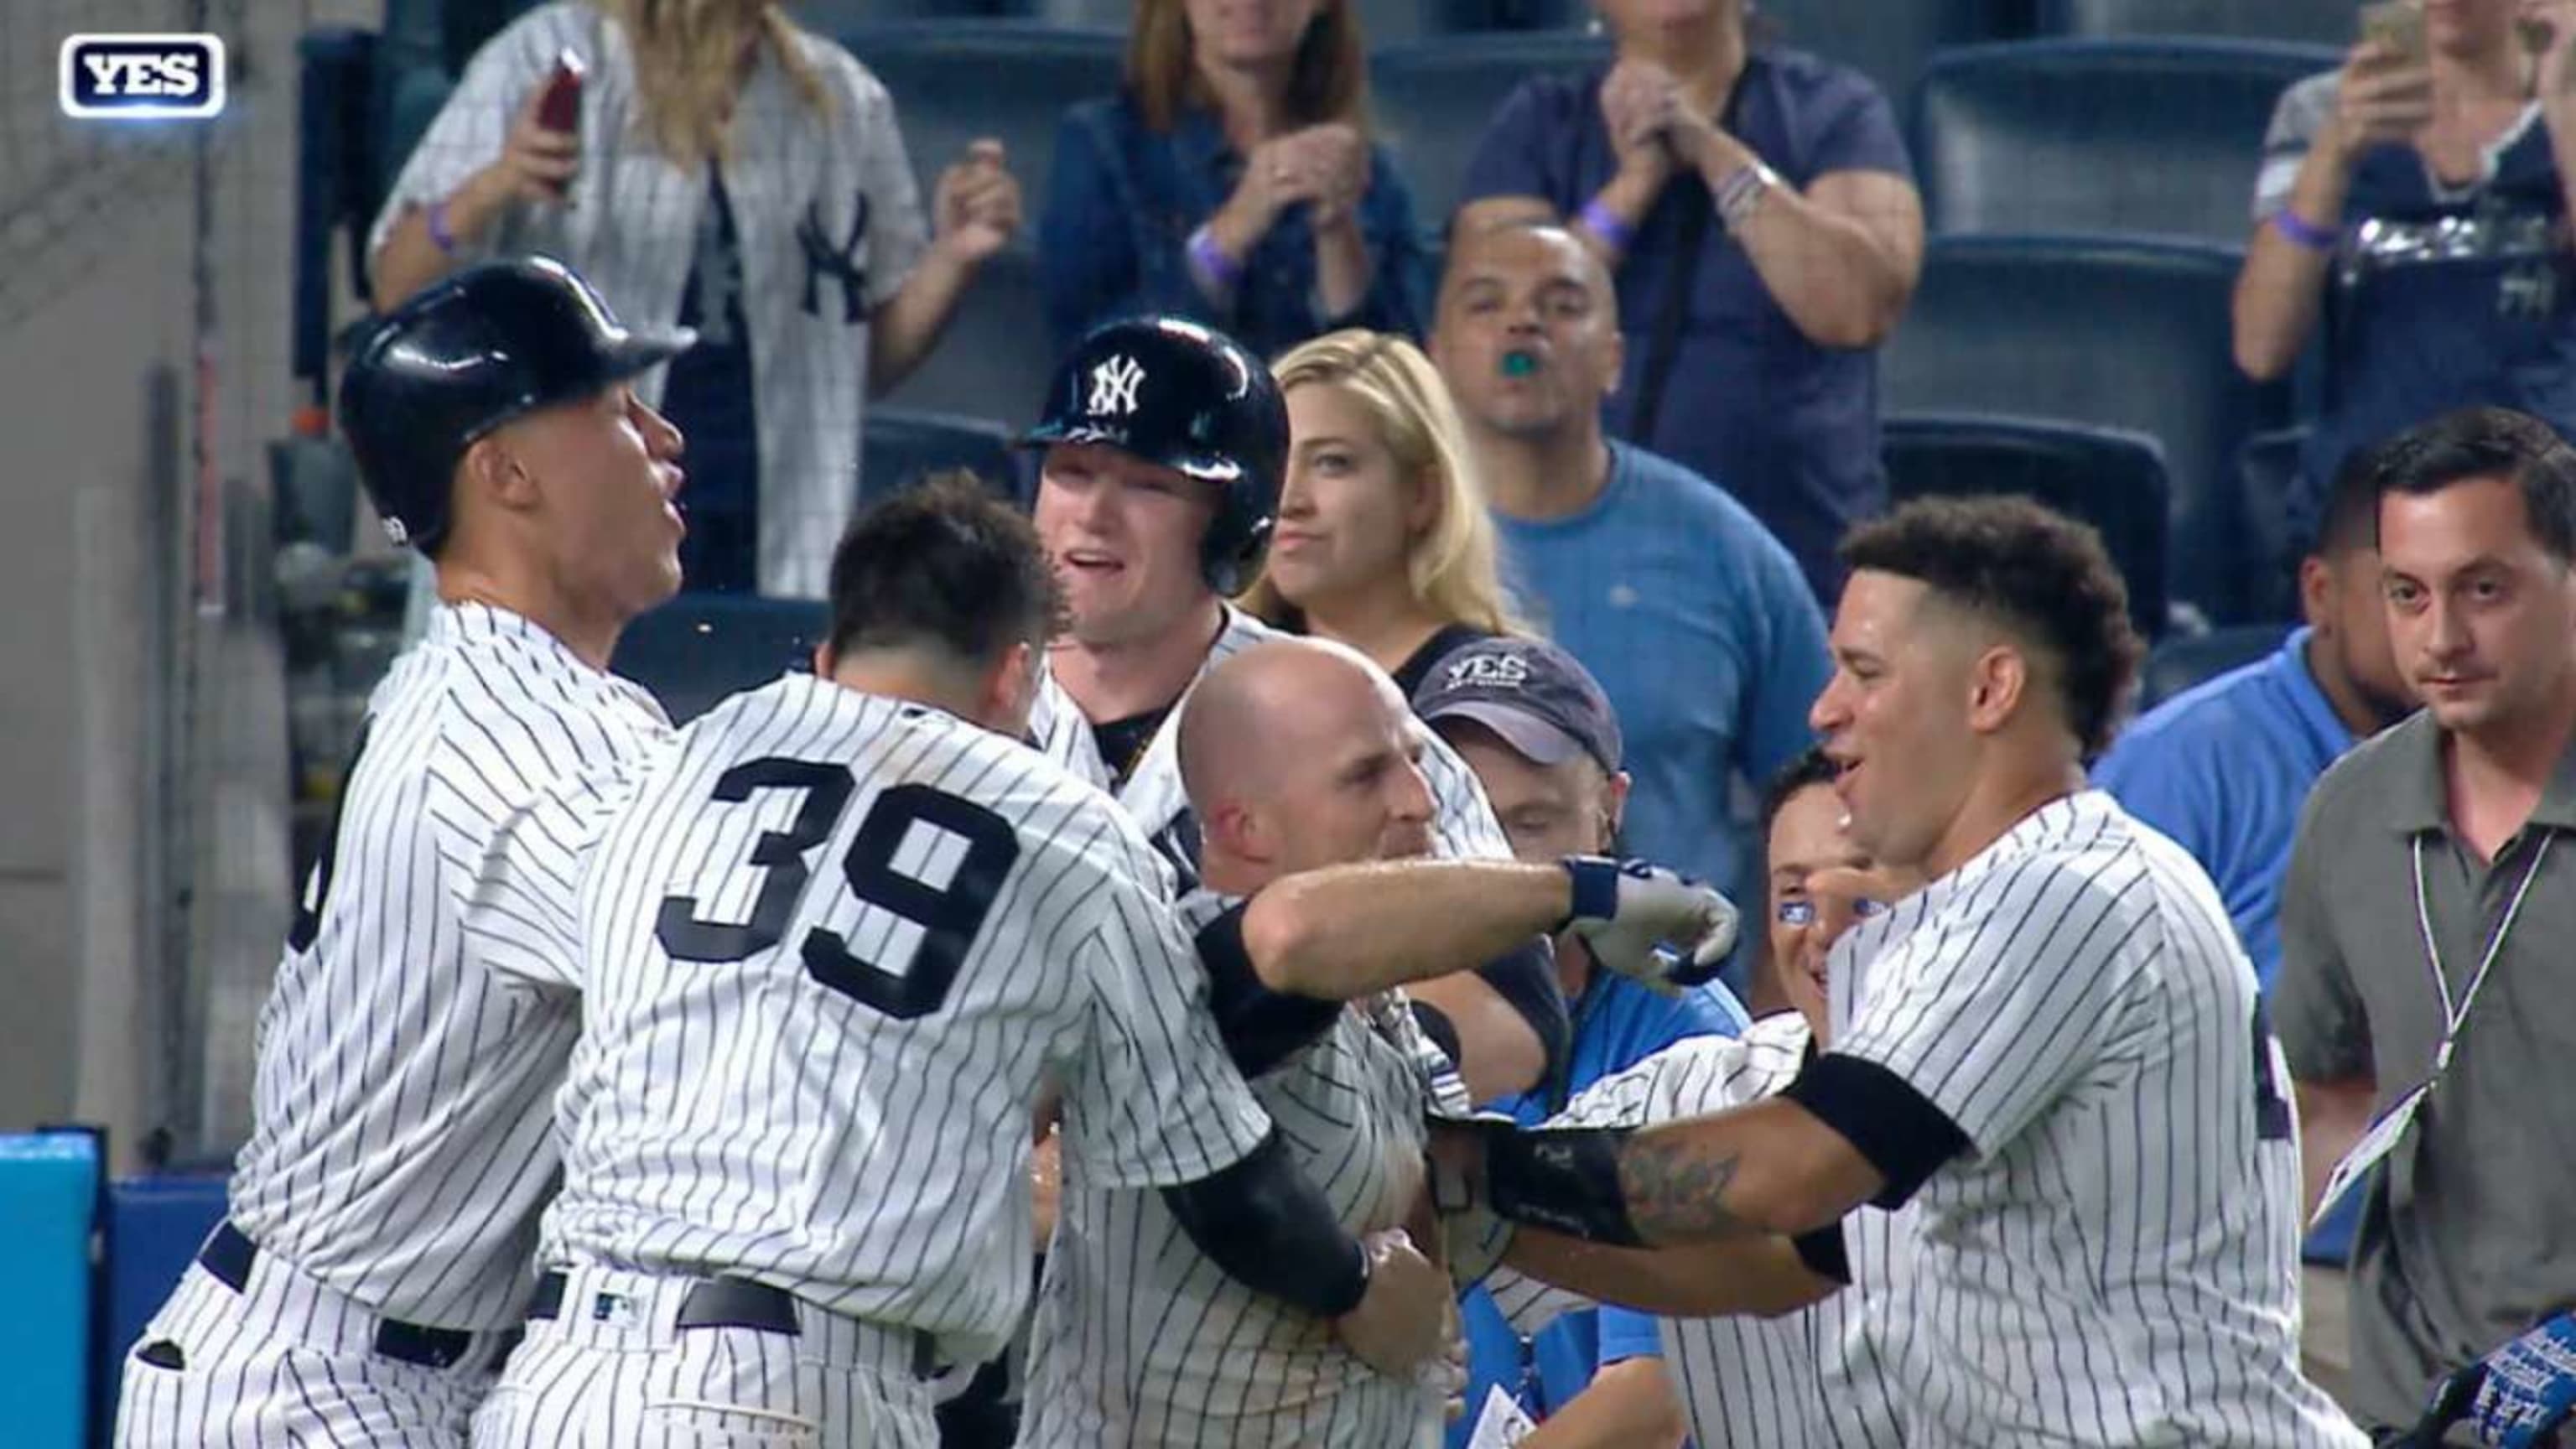 The Yankees' walk-off celebration claimed a victim: Aaron Judge's